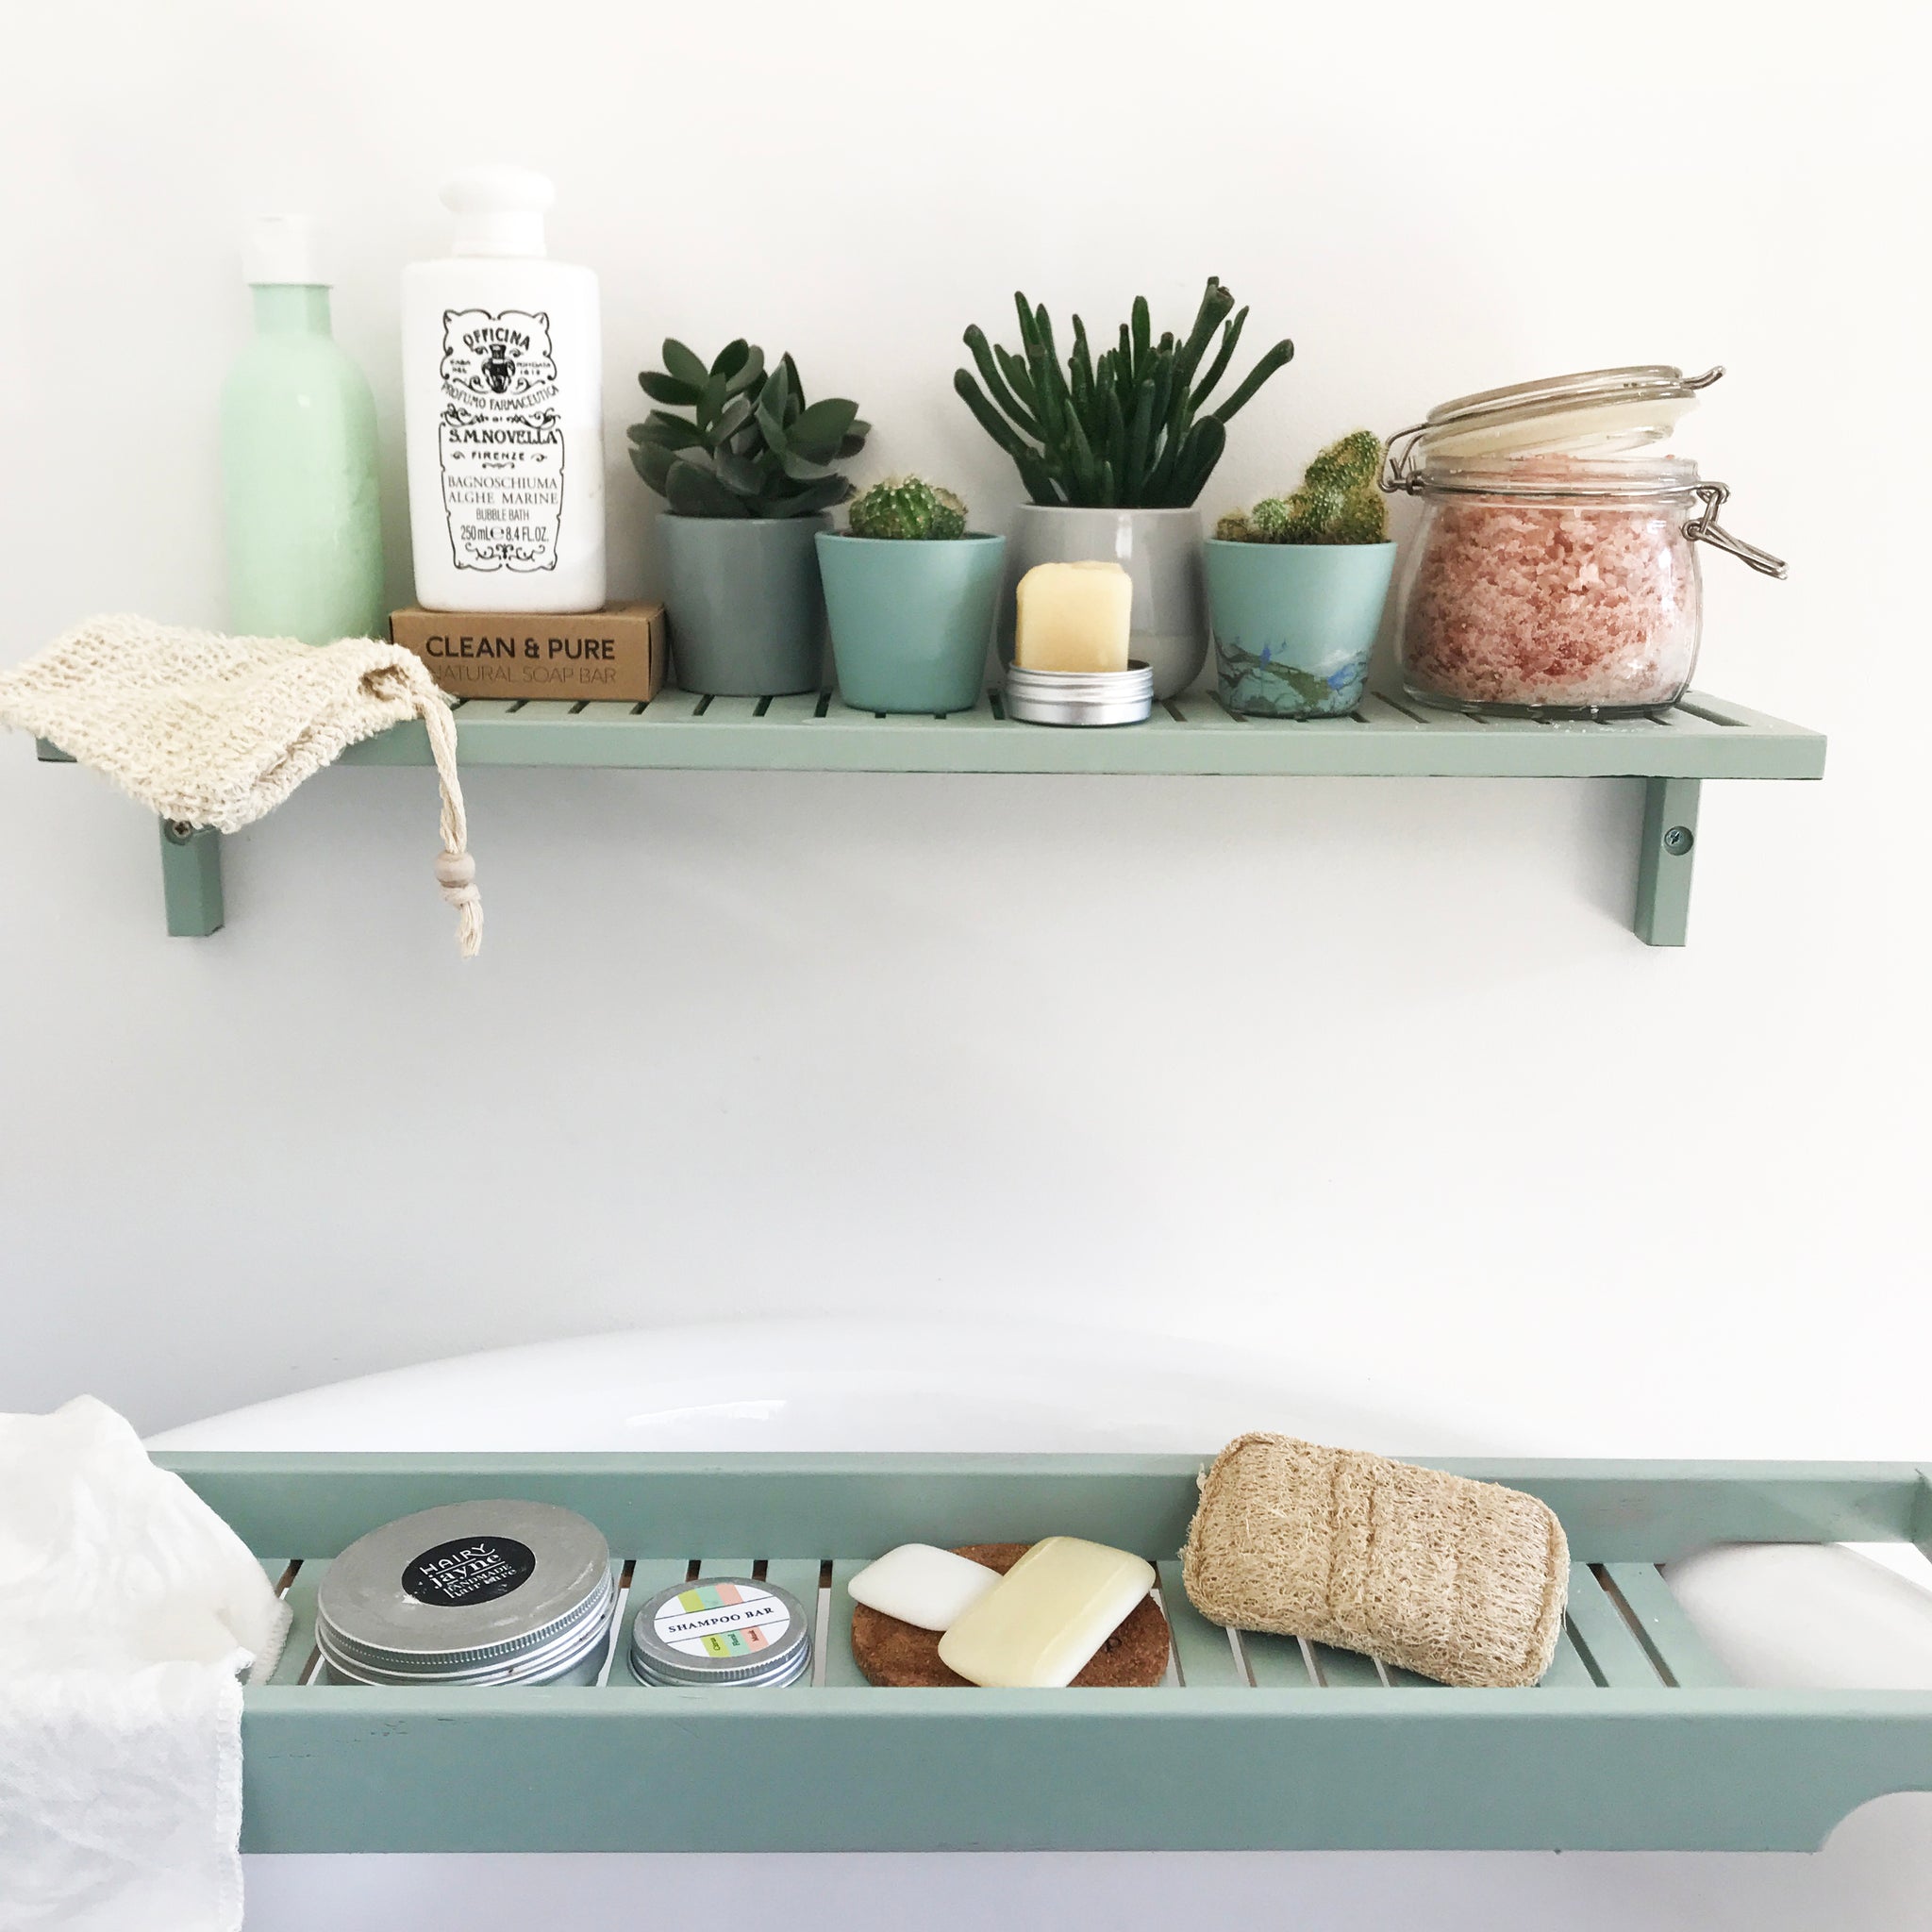 6 ways to reduce plastic in your bathroom